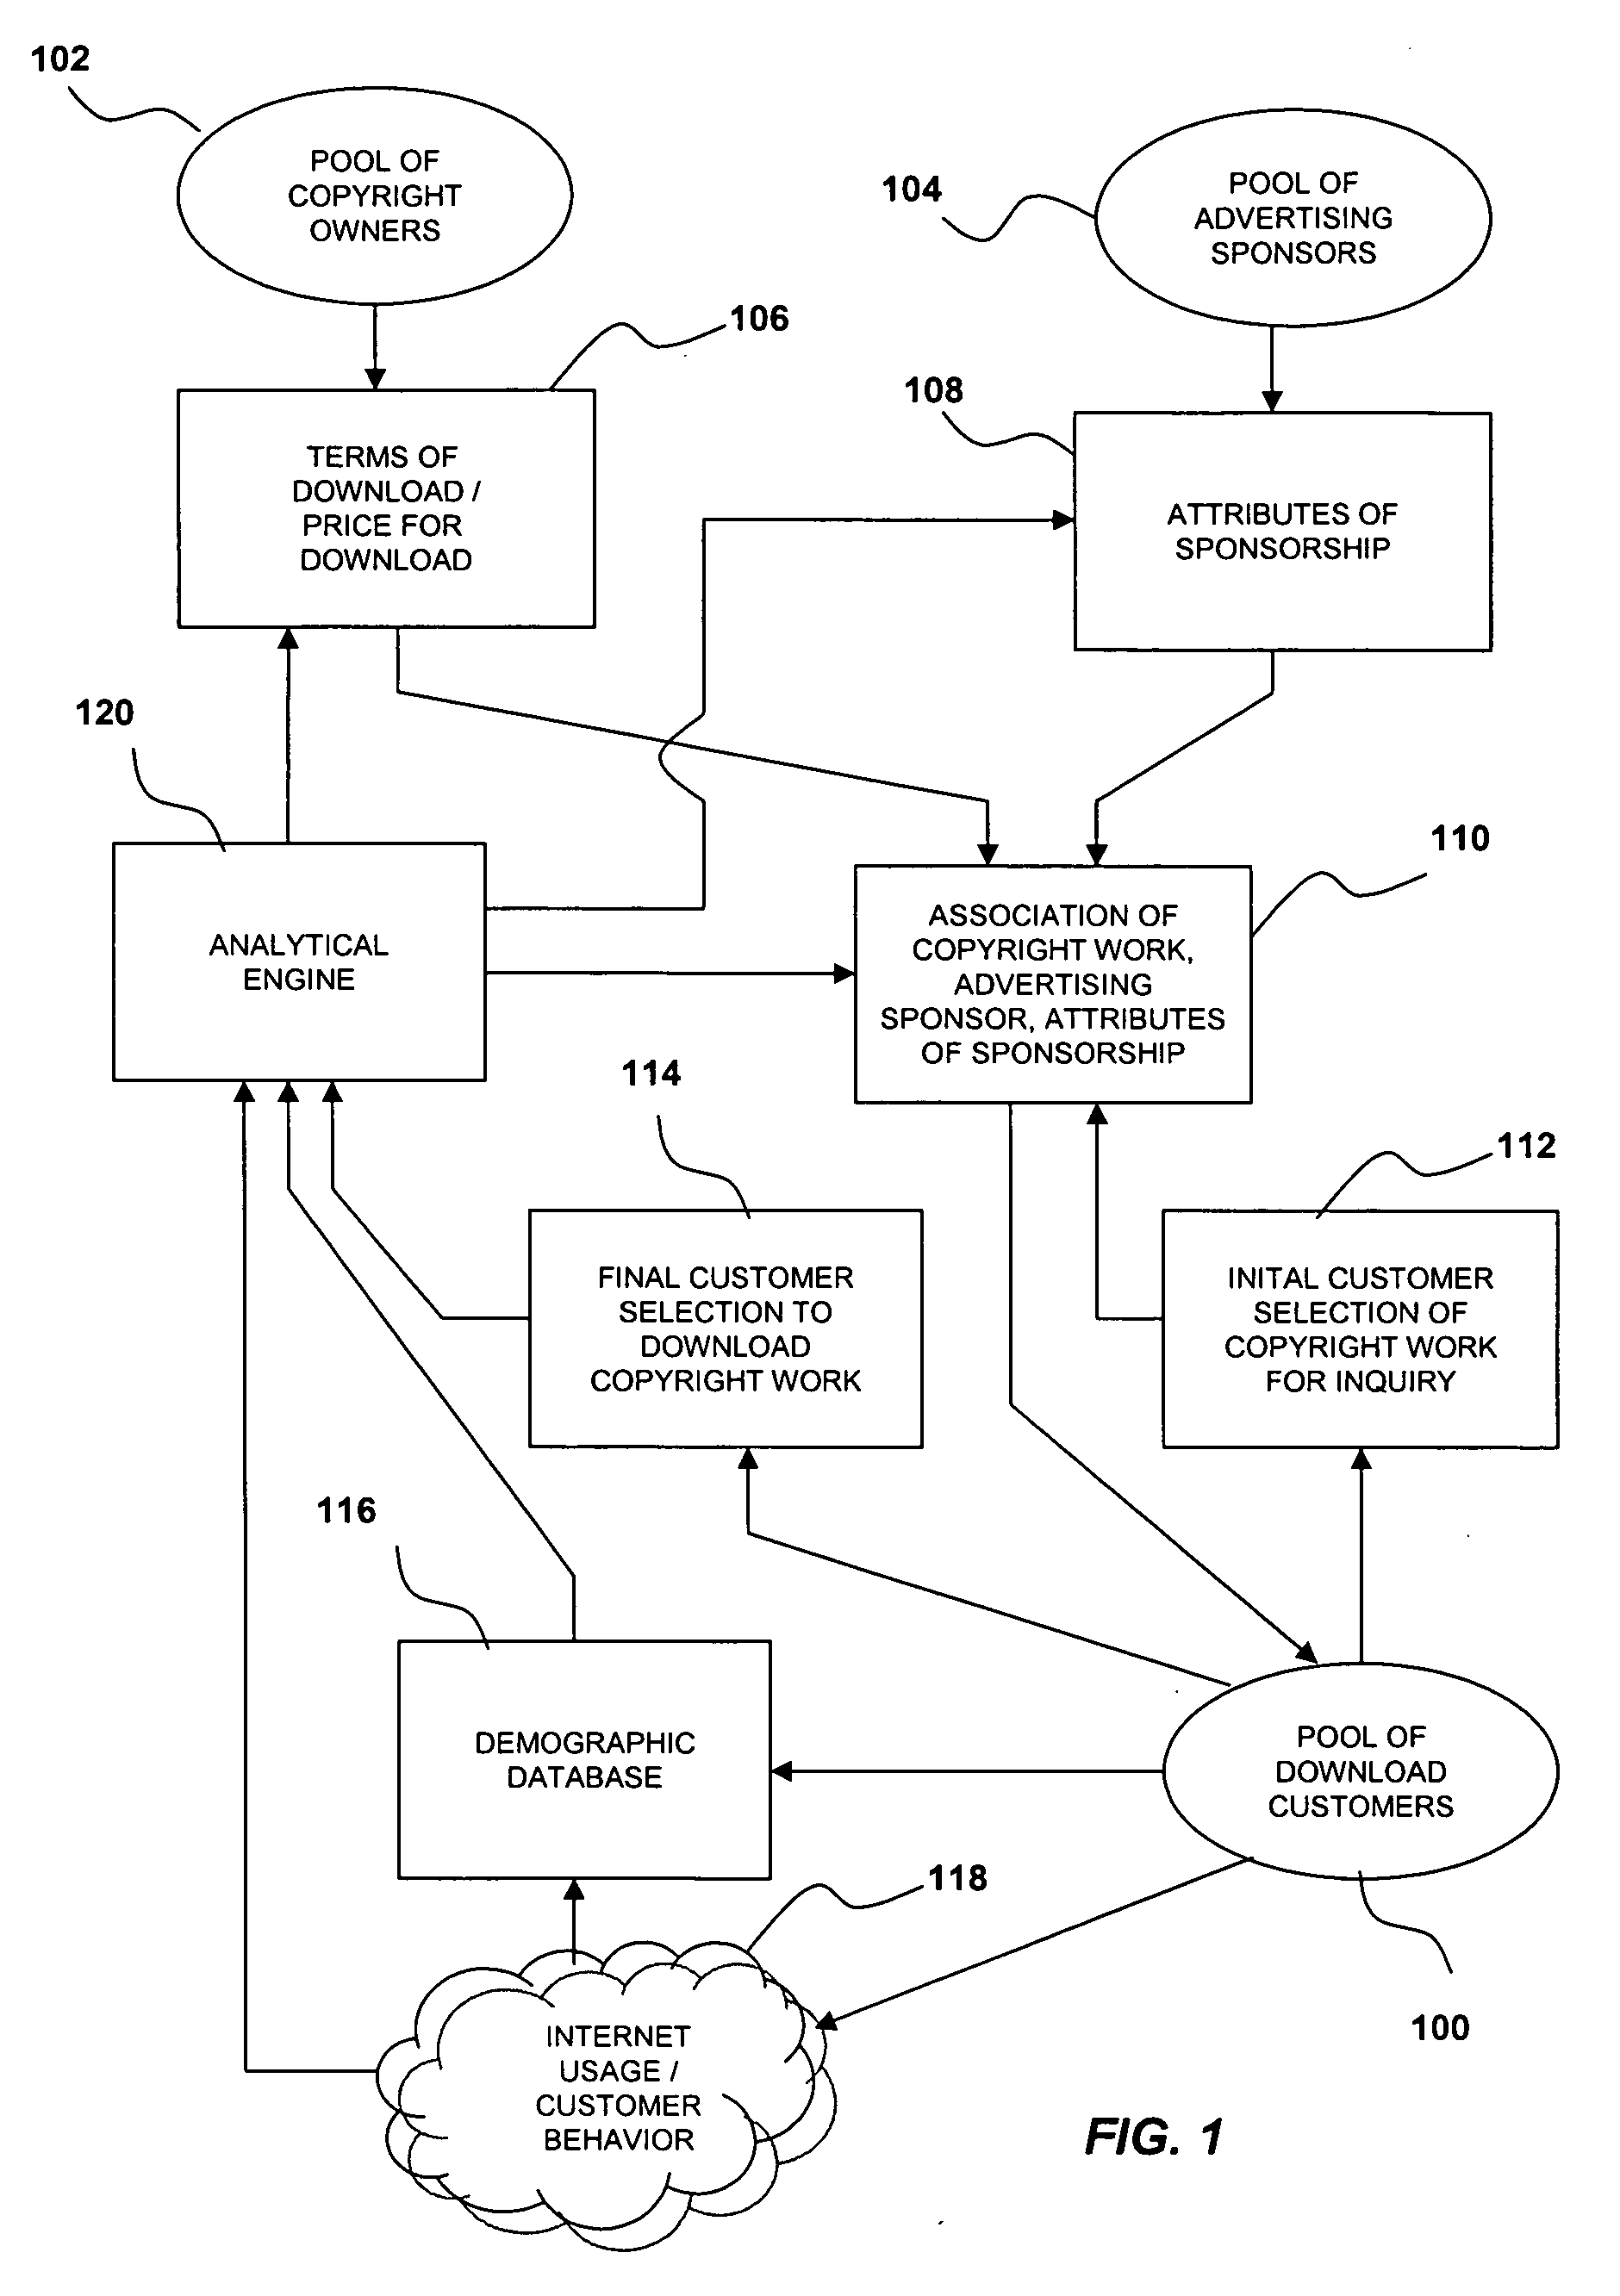 System and method for distributing content using advertising sponsorship